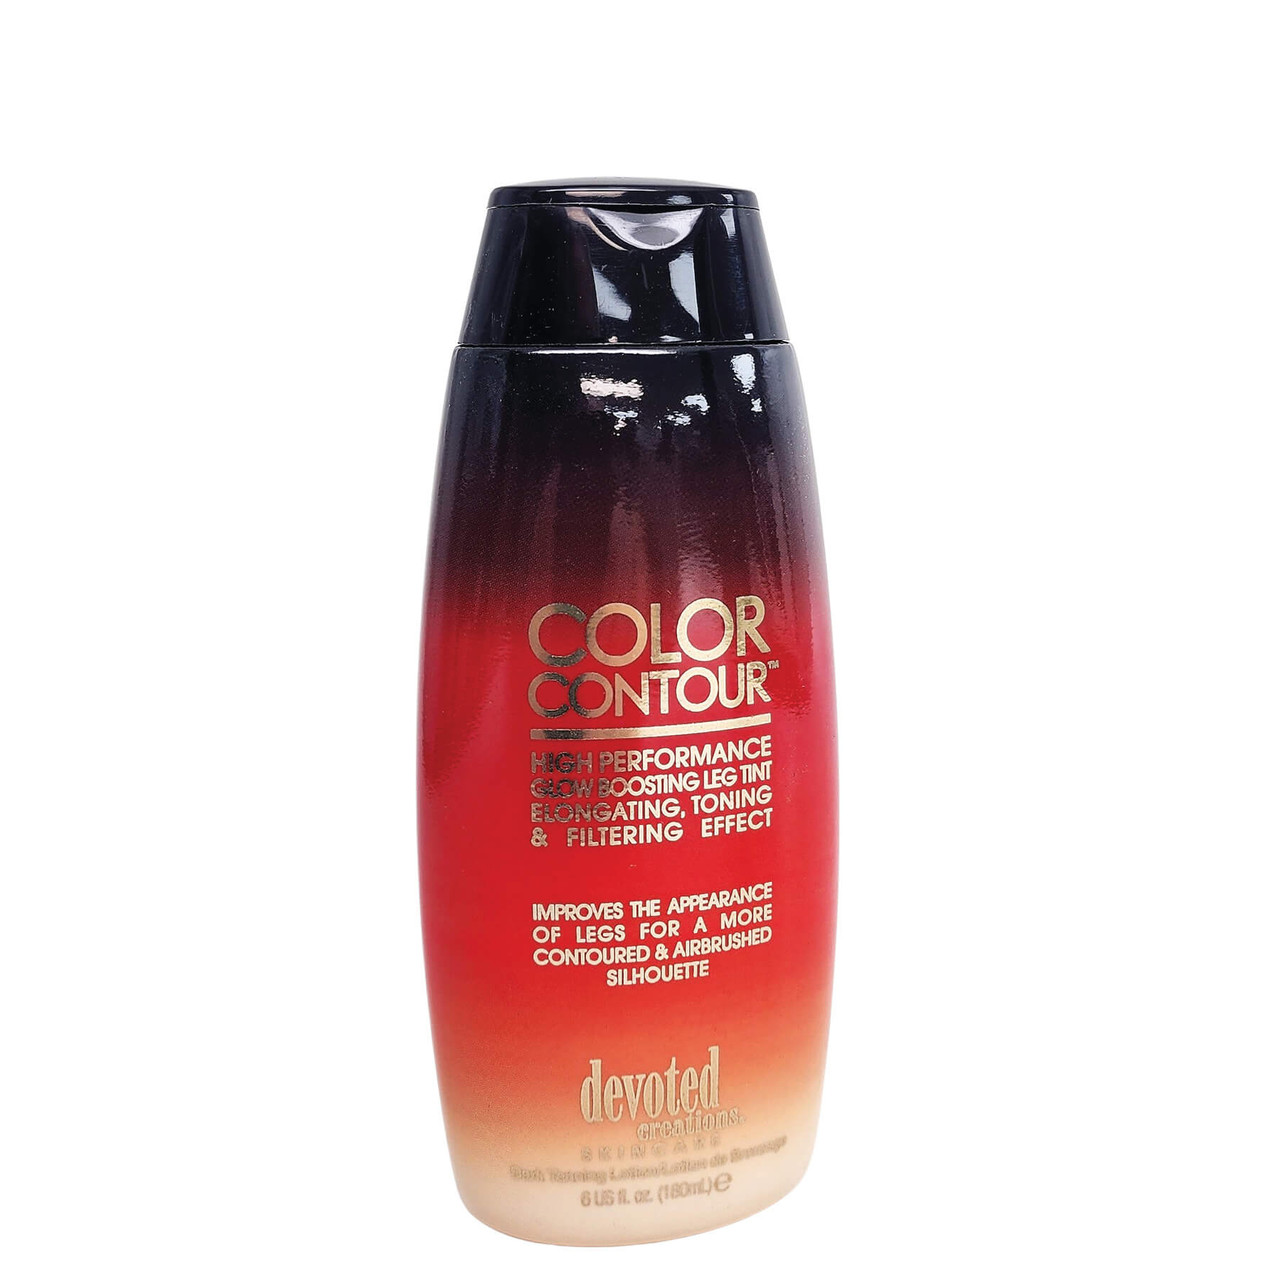 Devoted Creations Color Contour High Performance Glow Boosting Leg Tint - 6 oz